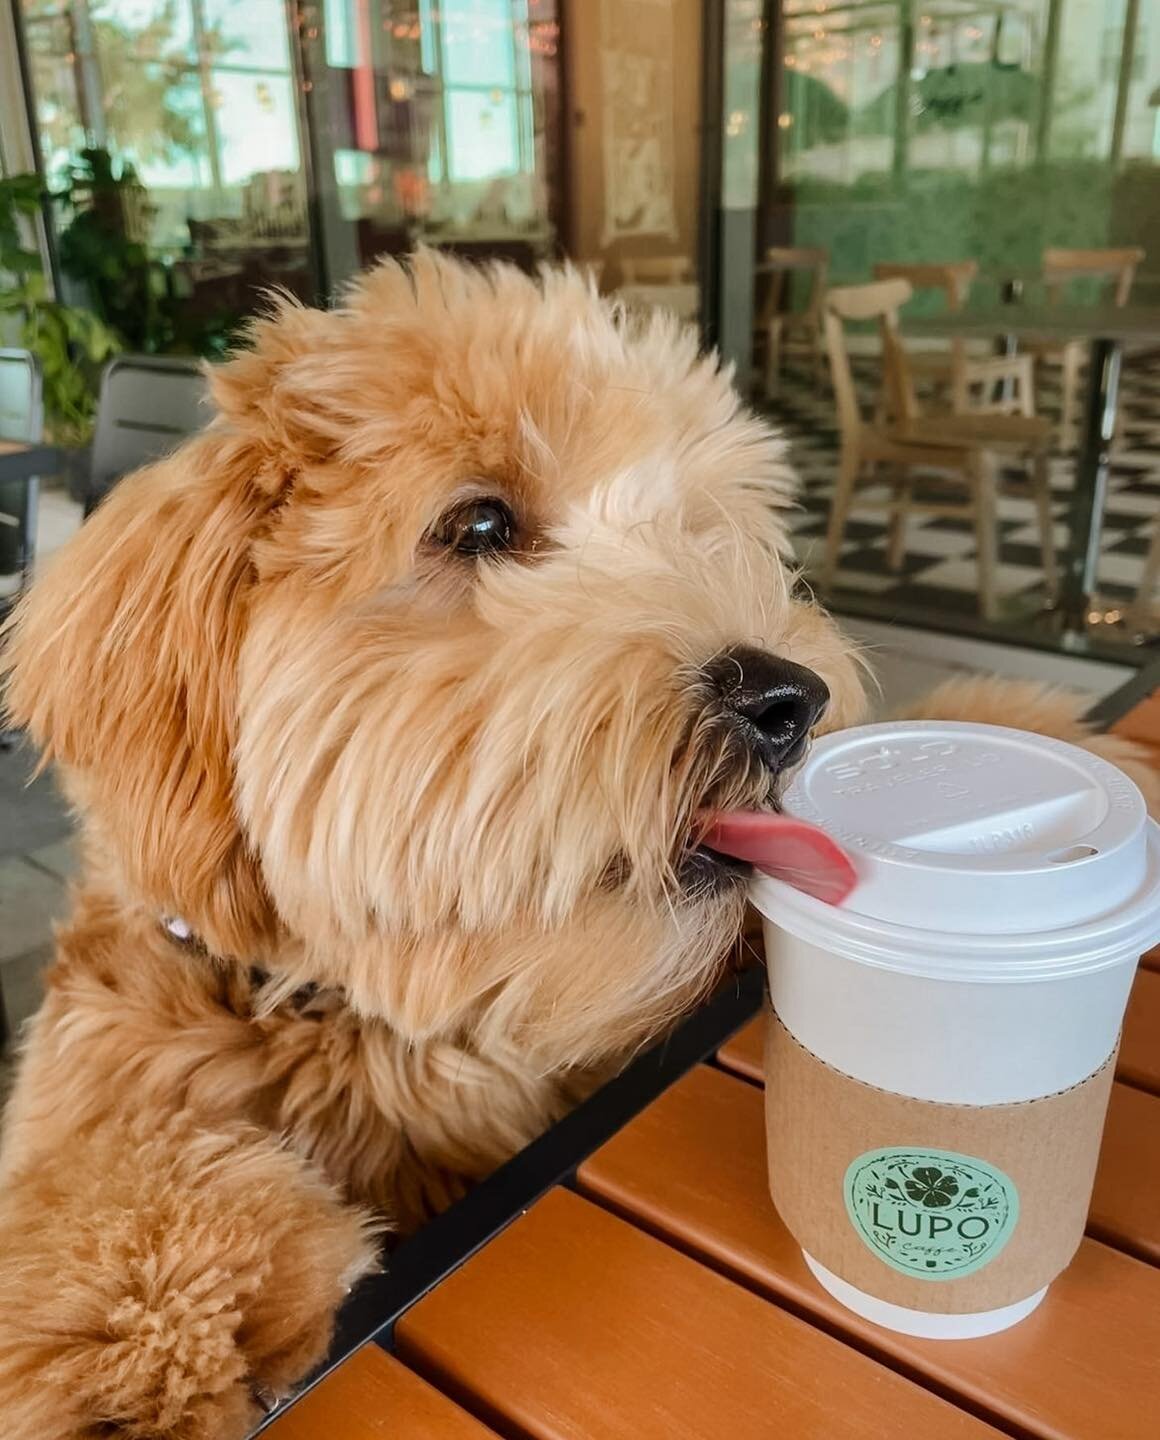 Nothing brightens our day more than seeing your pups on the patio! 🐶☕️

@super_cooperw